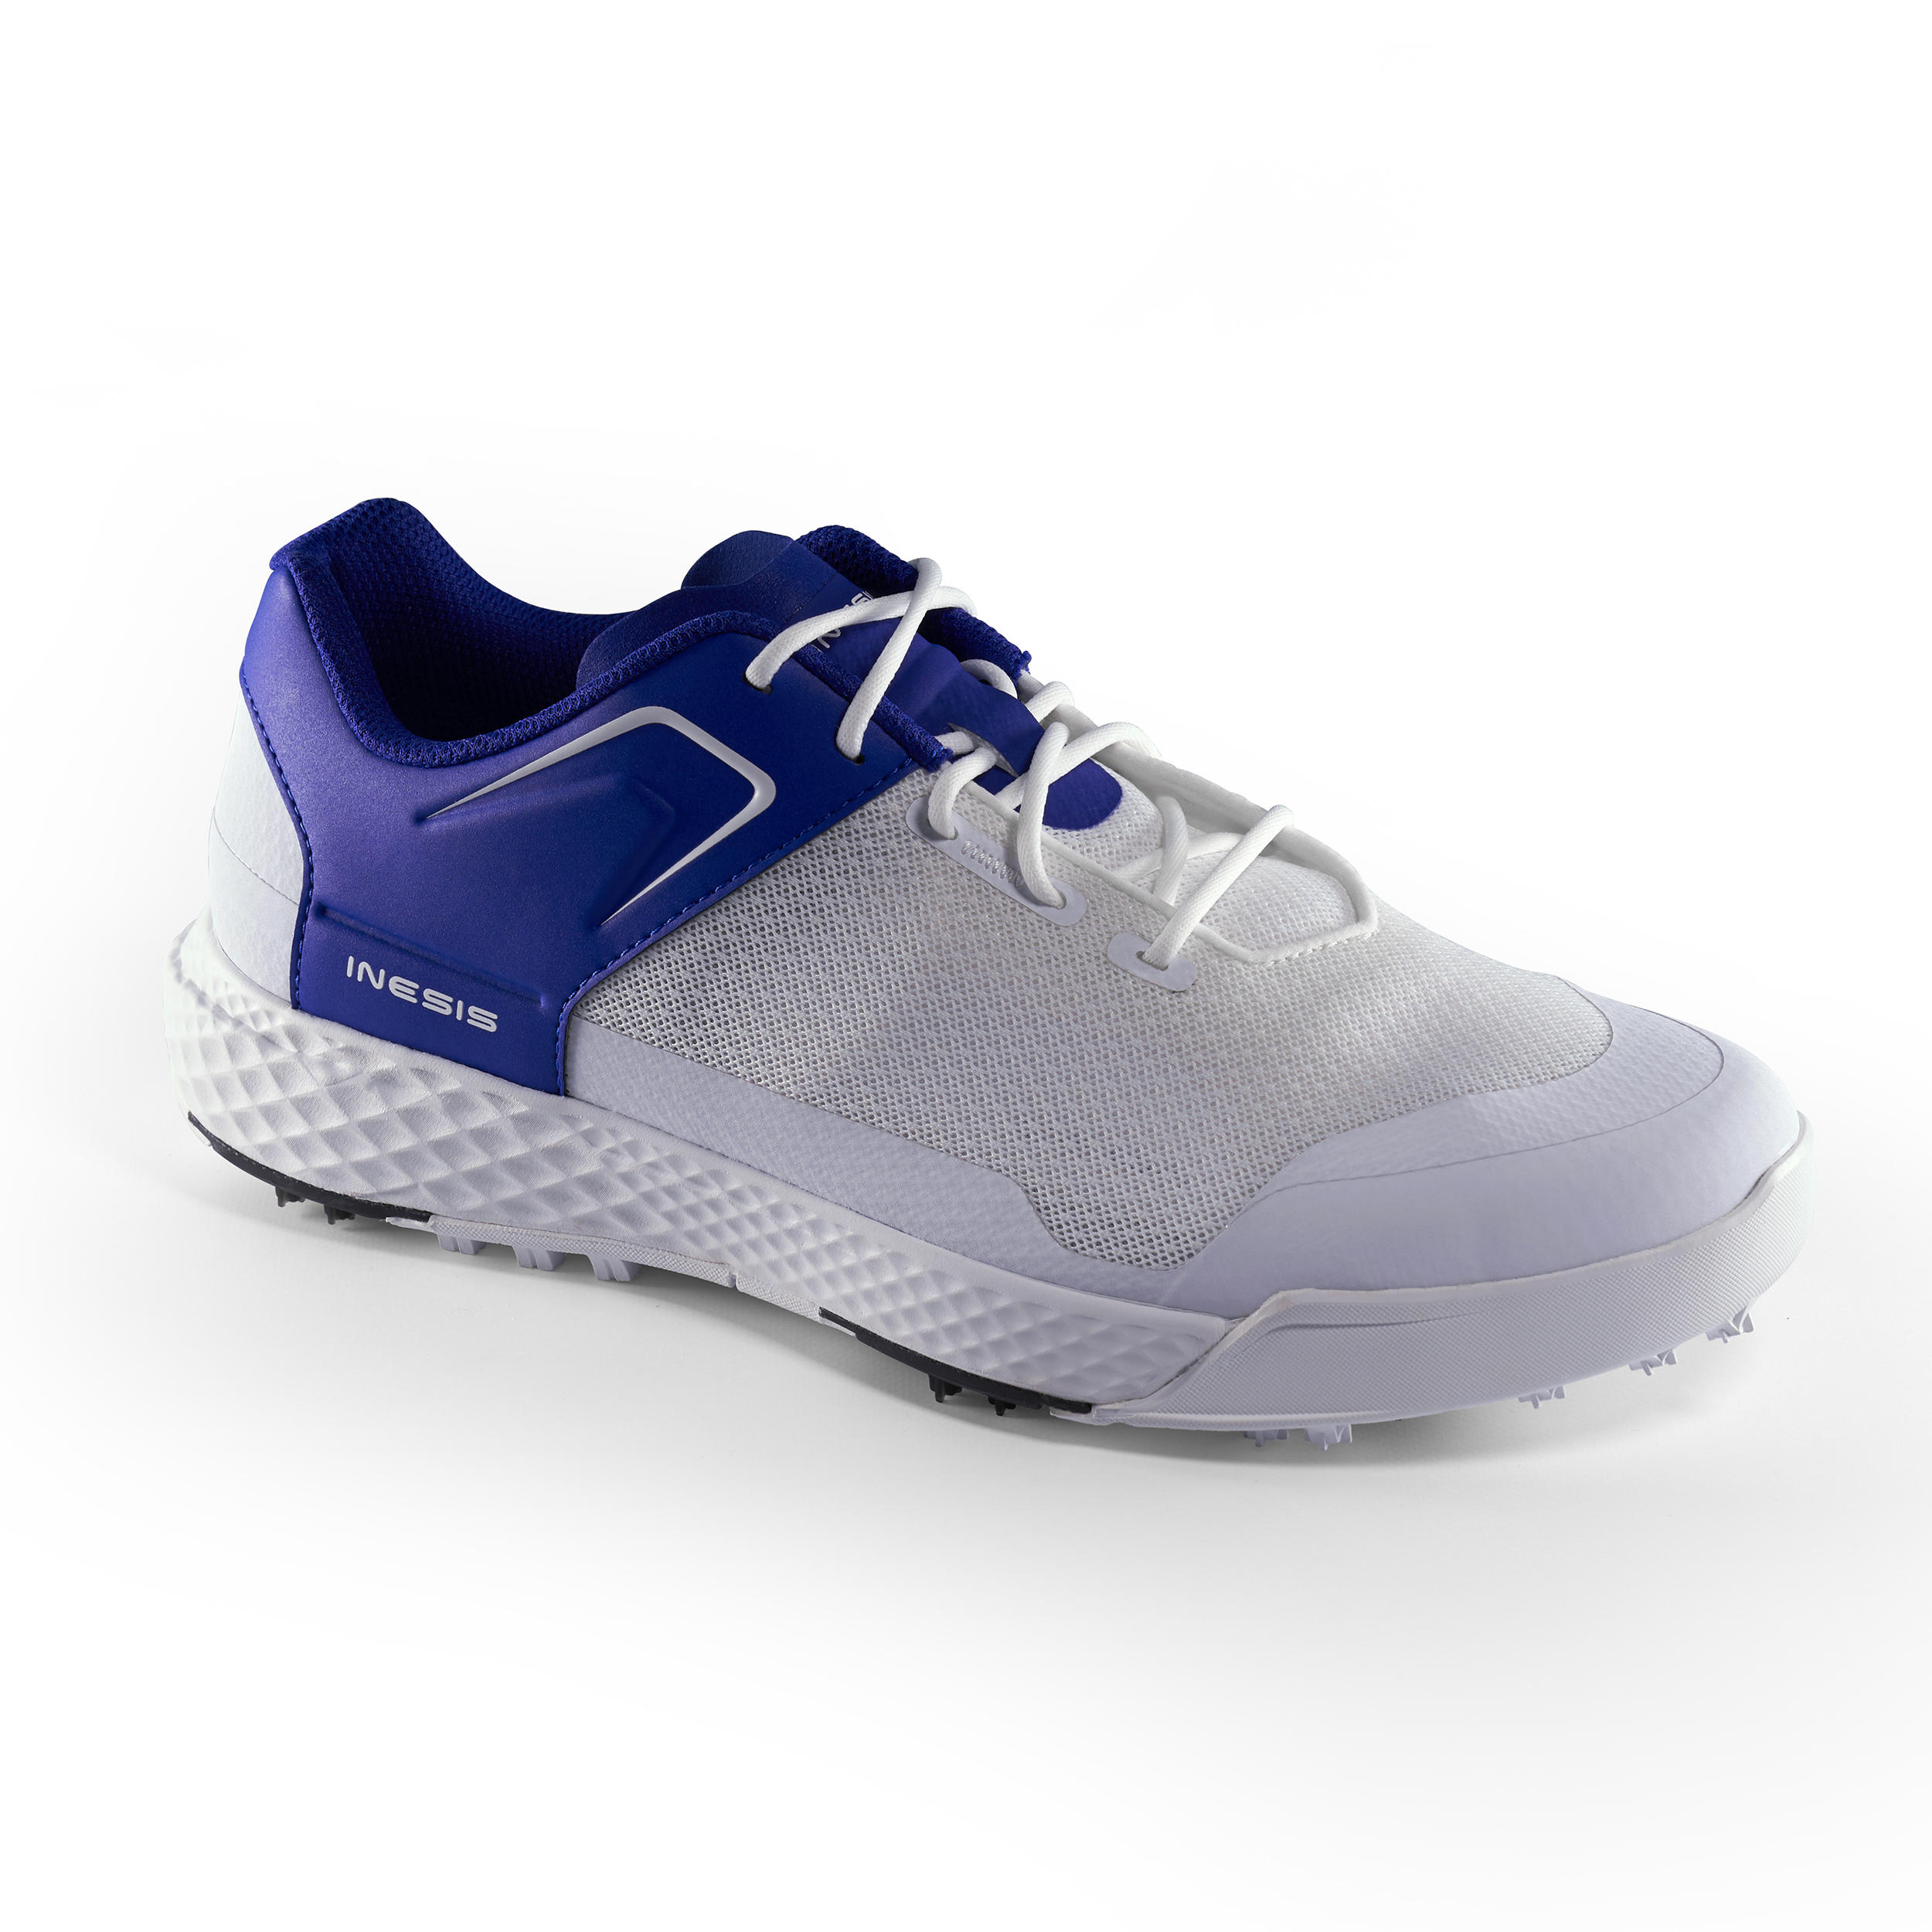 MEN’S GRIP SUMMER GOLF SHOES WHITE AND BLUE 1/13